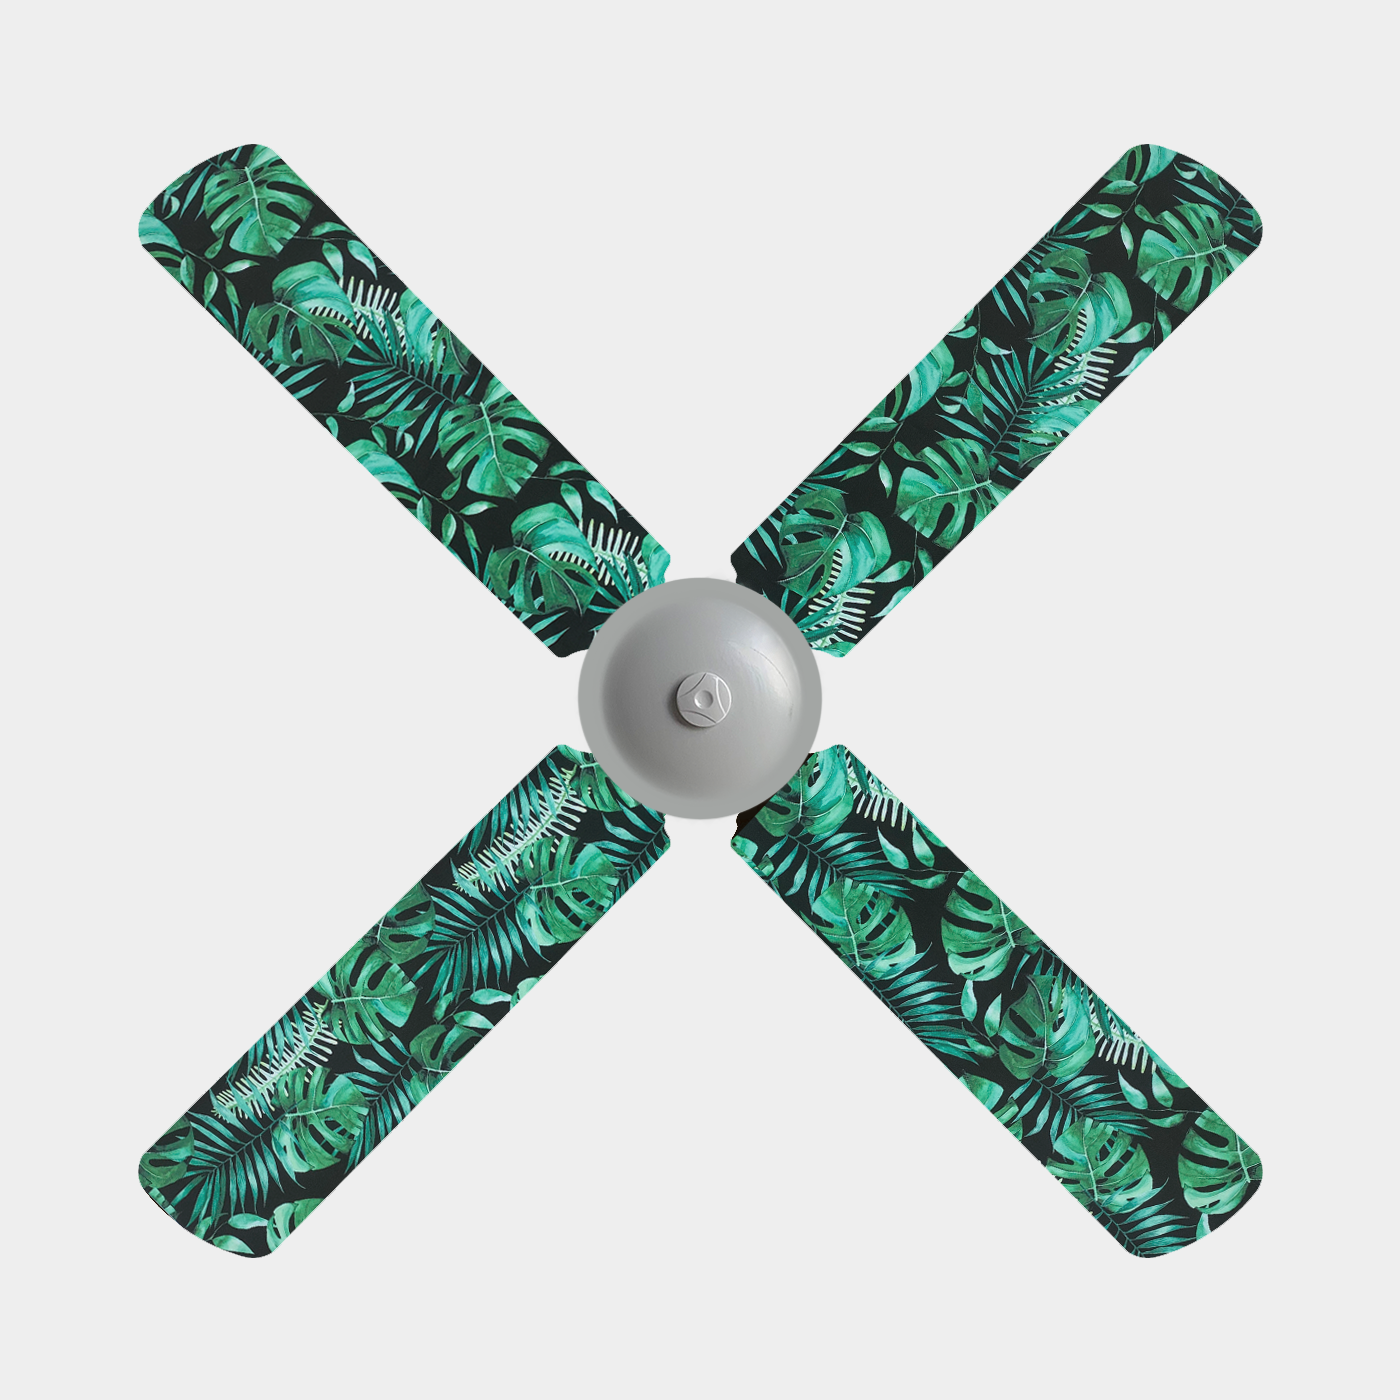 Three blade ceiling fan with fan covers with black background and large green leaves and ferns